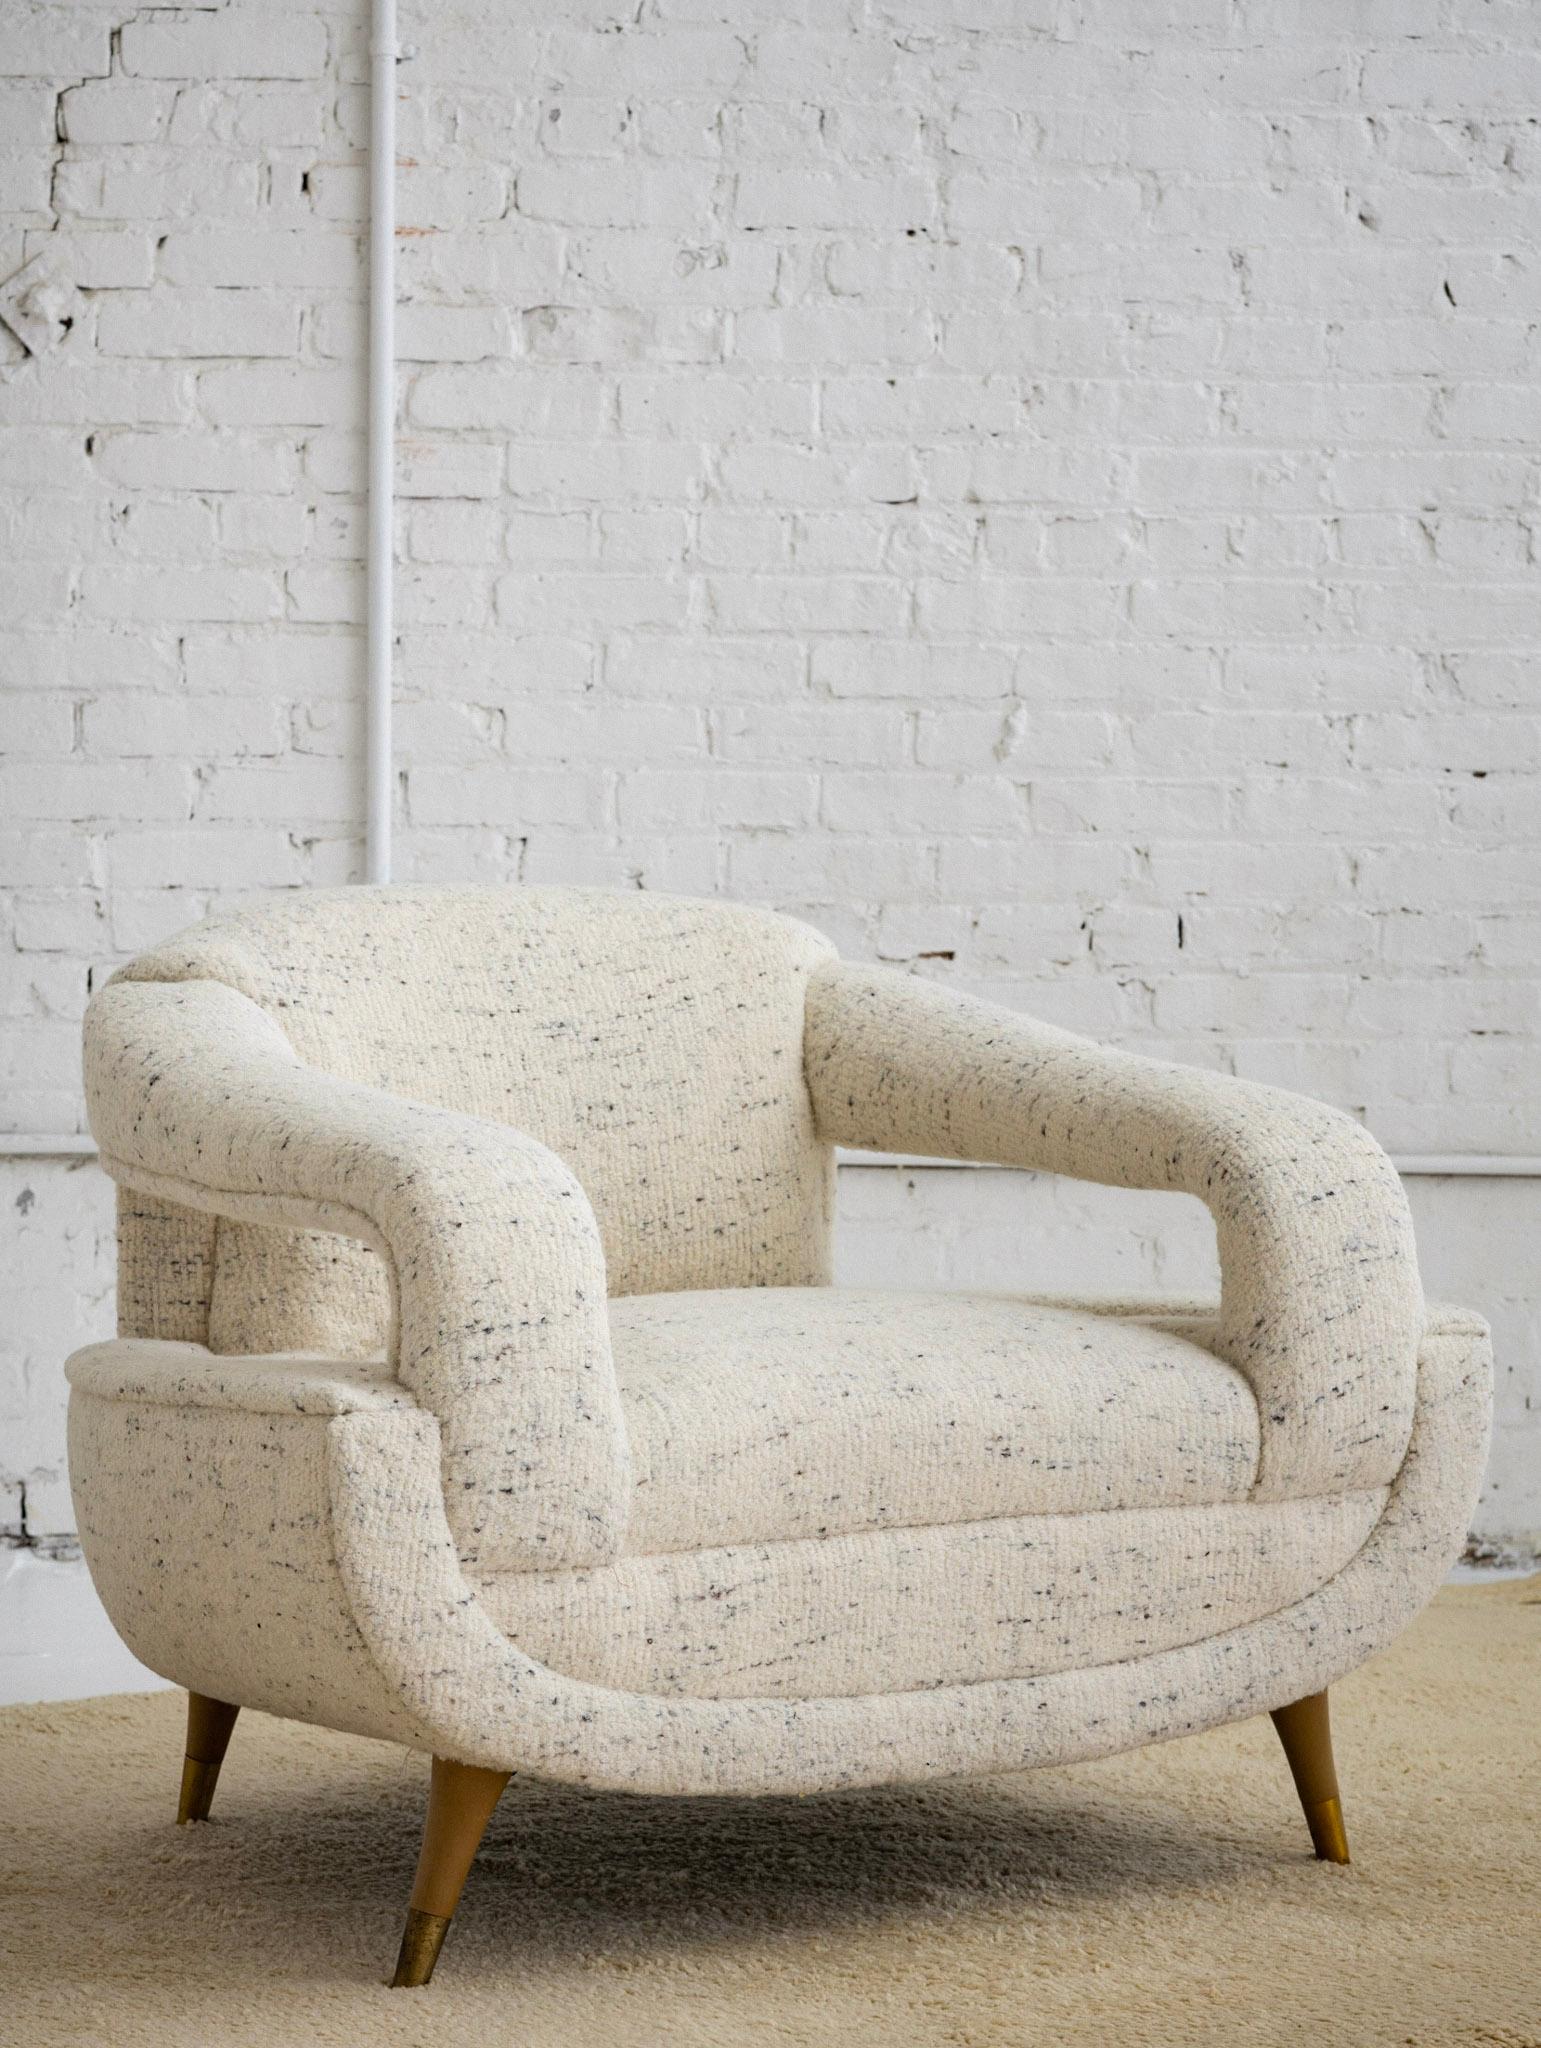 A Mid-Century Modern armchair. Newly reupholstered in a soft textured wool. Cream in color with speckles of brown and black. Blonde wood feet with brass caps.